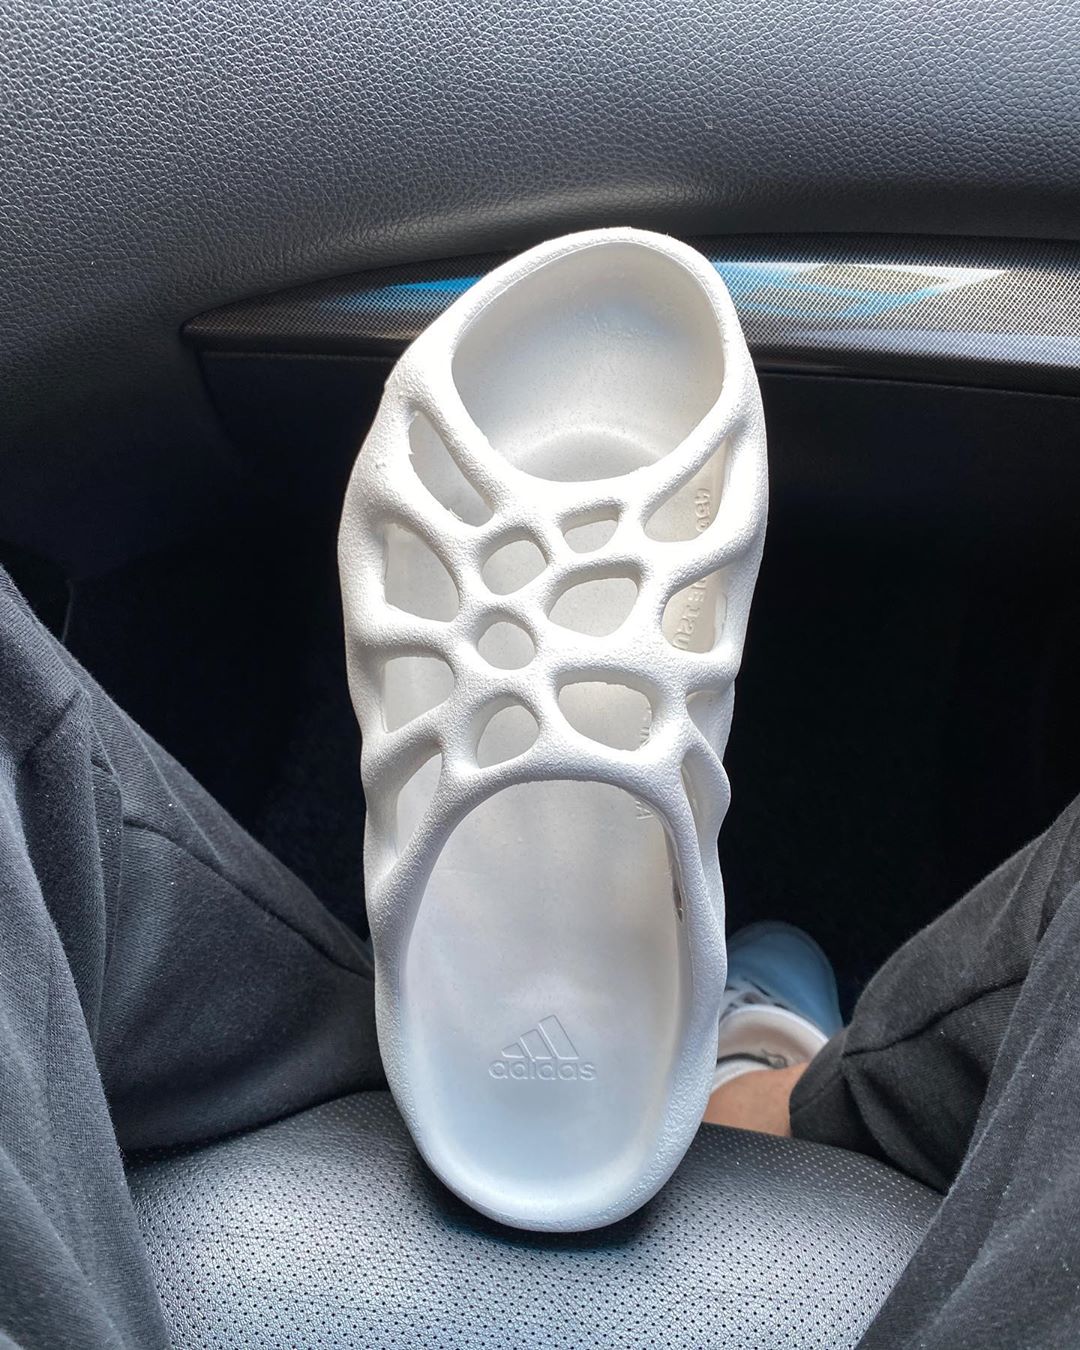 adidas YEEZY 450 Slides To Release This 